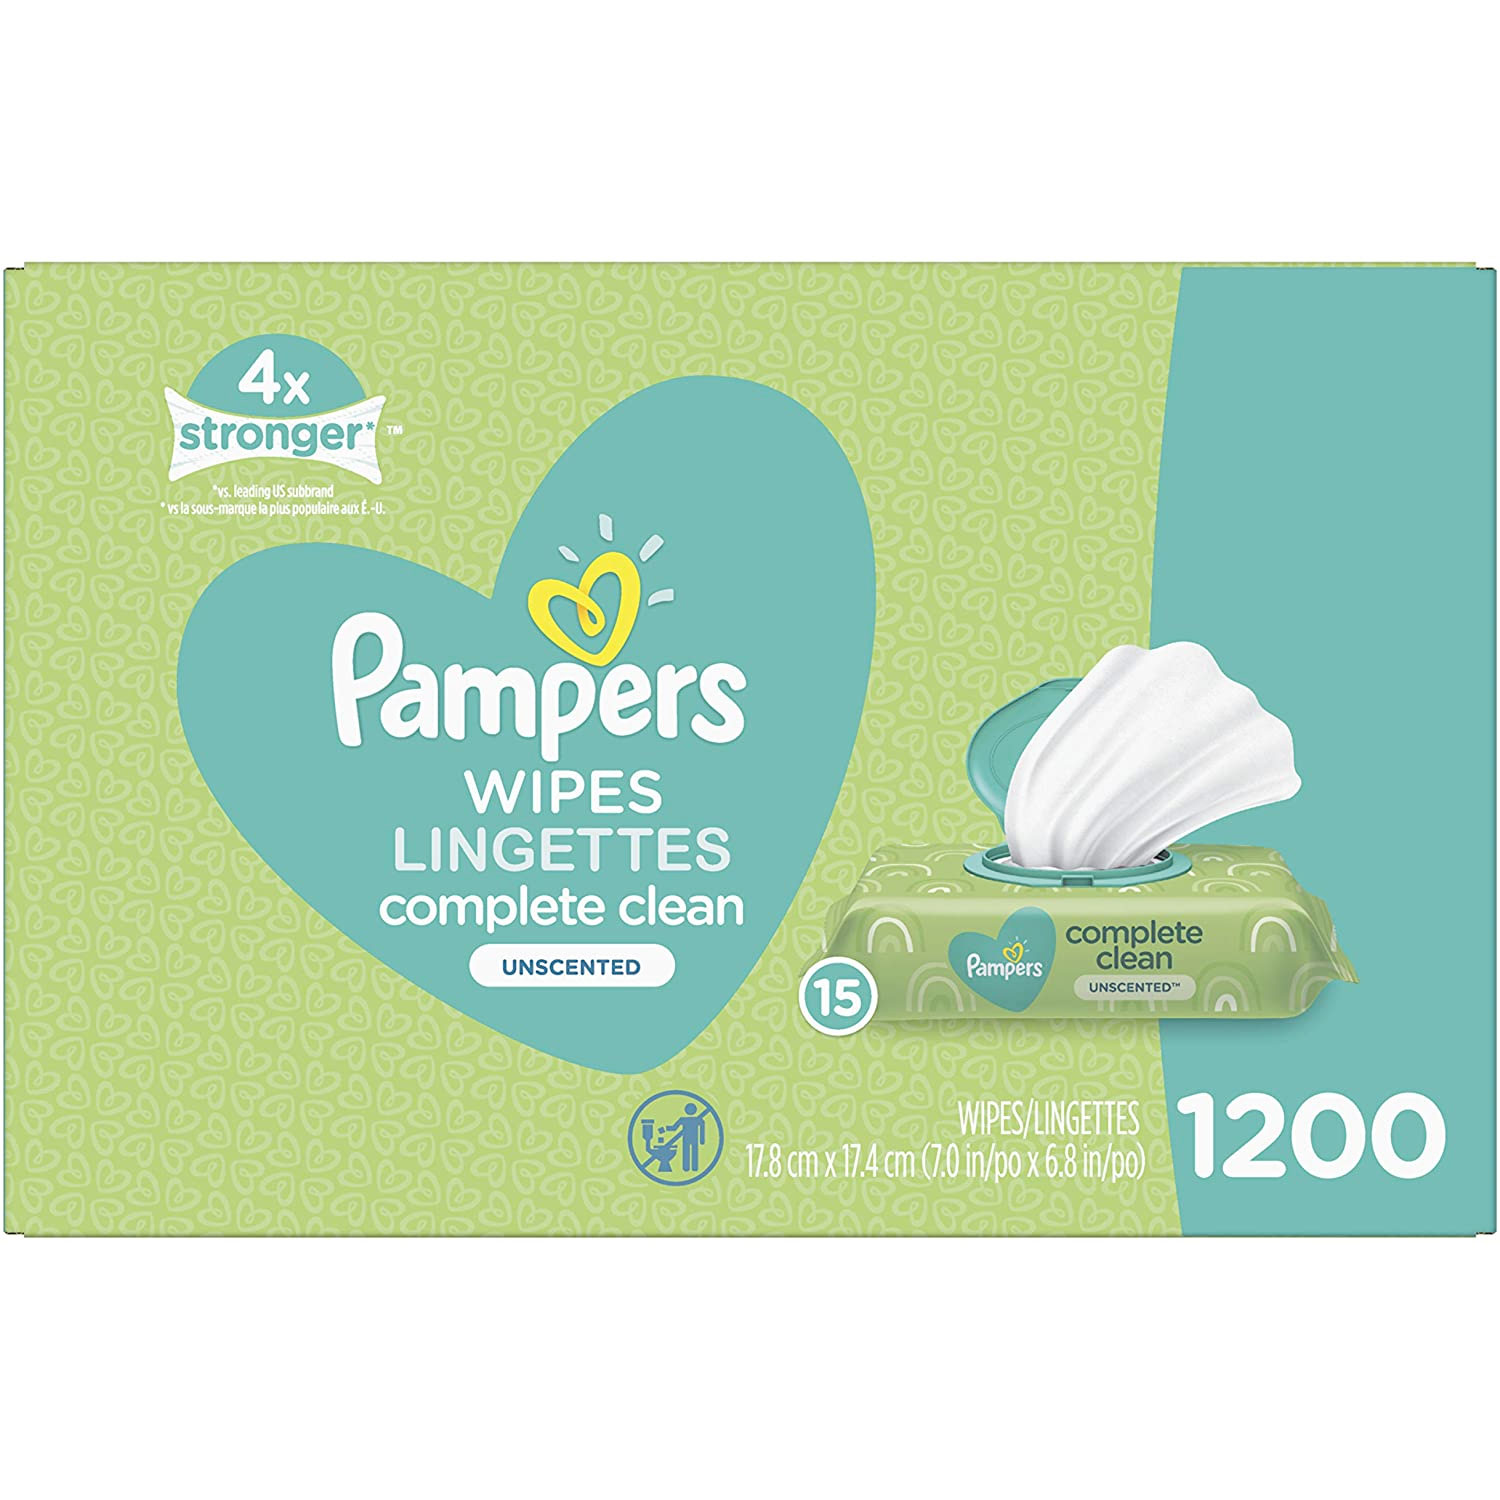 Amazon：Pampers Baby Wipes (1200 Count)只賣$20.99